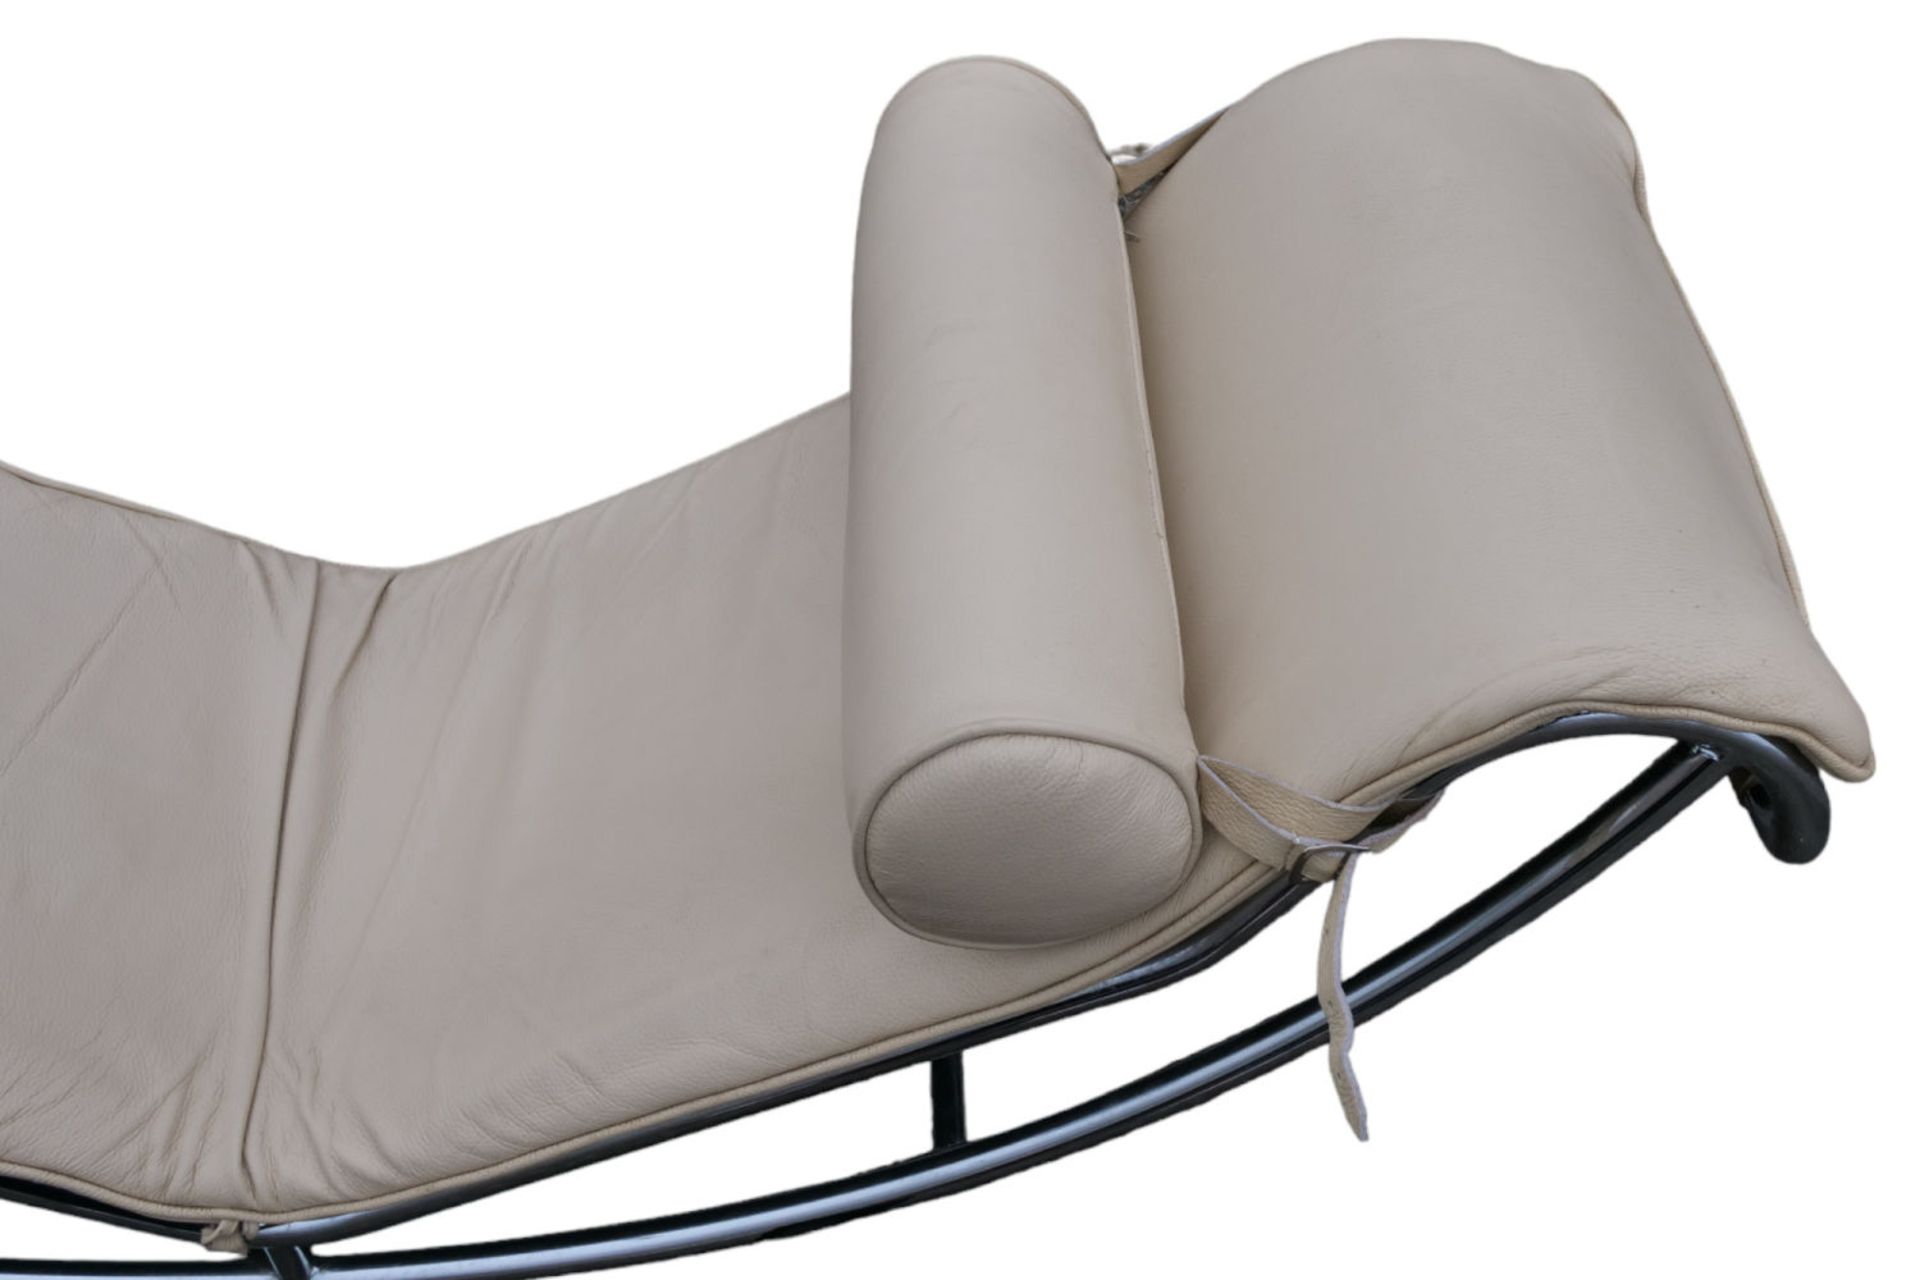 A leather Corbusier LC4 Chaise Longue Replica, 20th Century - Image 4 of 5